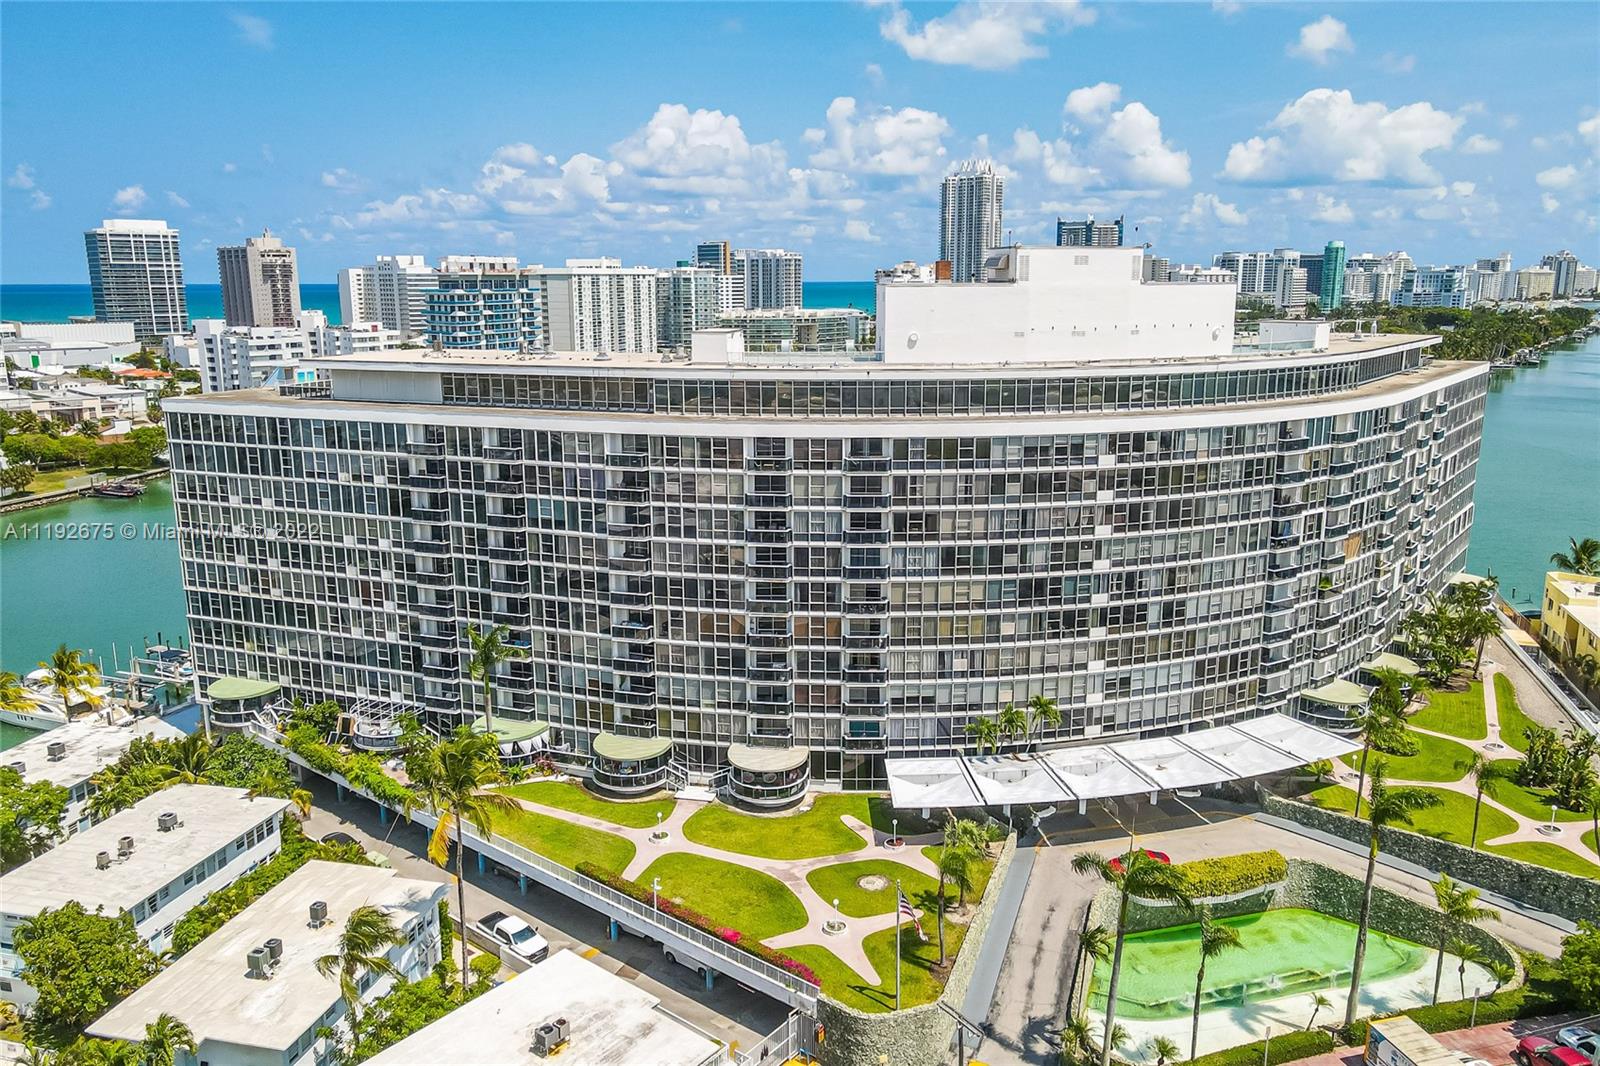 Beautiful unit in the prestigious King Cole building!!!   Floor to ceiling Windows with lots of natural light.  This Building has just undergone the 50year certification and boast luminous new hallways, balconies & docks.  Luxury service, doorman, valet 24/7, olympic size heated pool, gym and marina.  Maintenance includes all electric, water, internet (250MB) cable TV, and one parking space using valet, 2nd car $75 a month.  Walking distance to beach, restaurant, supermarkets and shops.  EZ TO SHOW!!